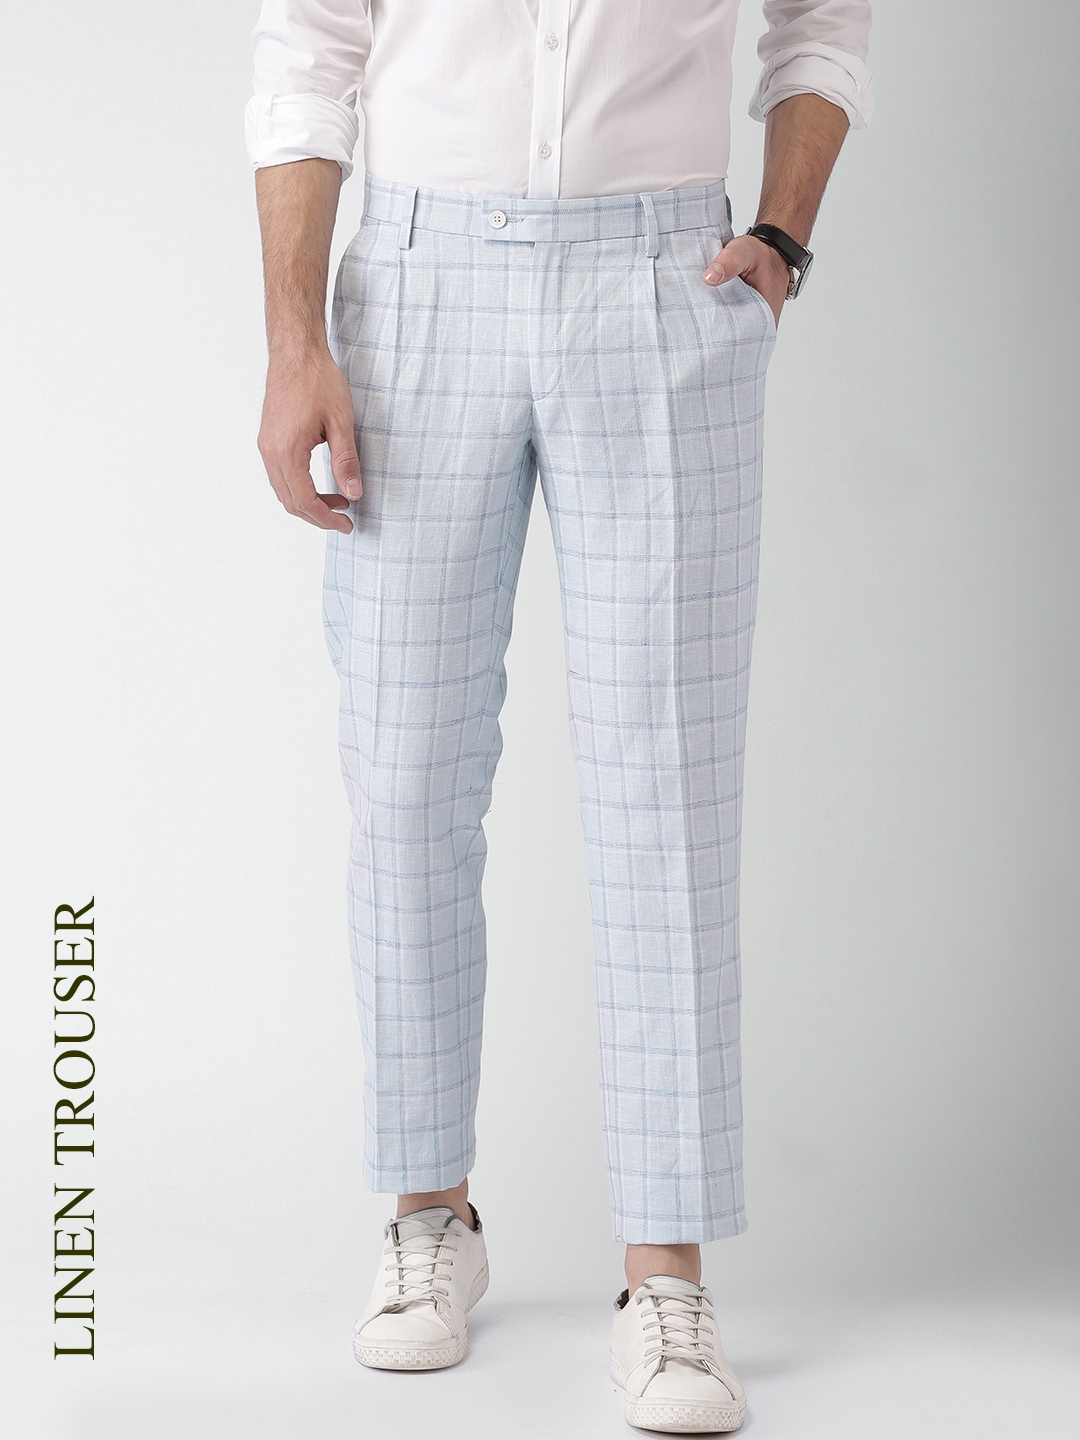 Buy Men Grey Check Carrot Fit Formal Trousers Online  743878  Peter  England